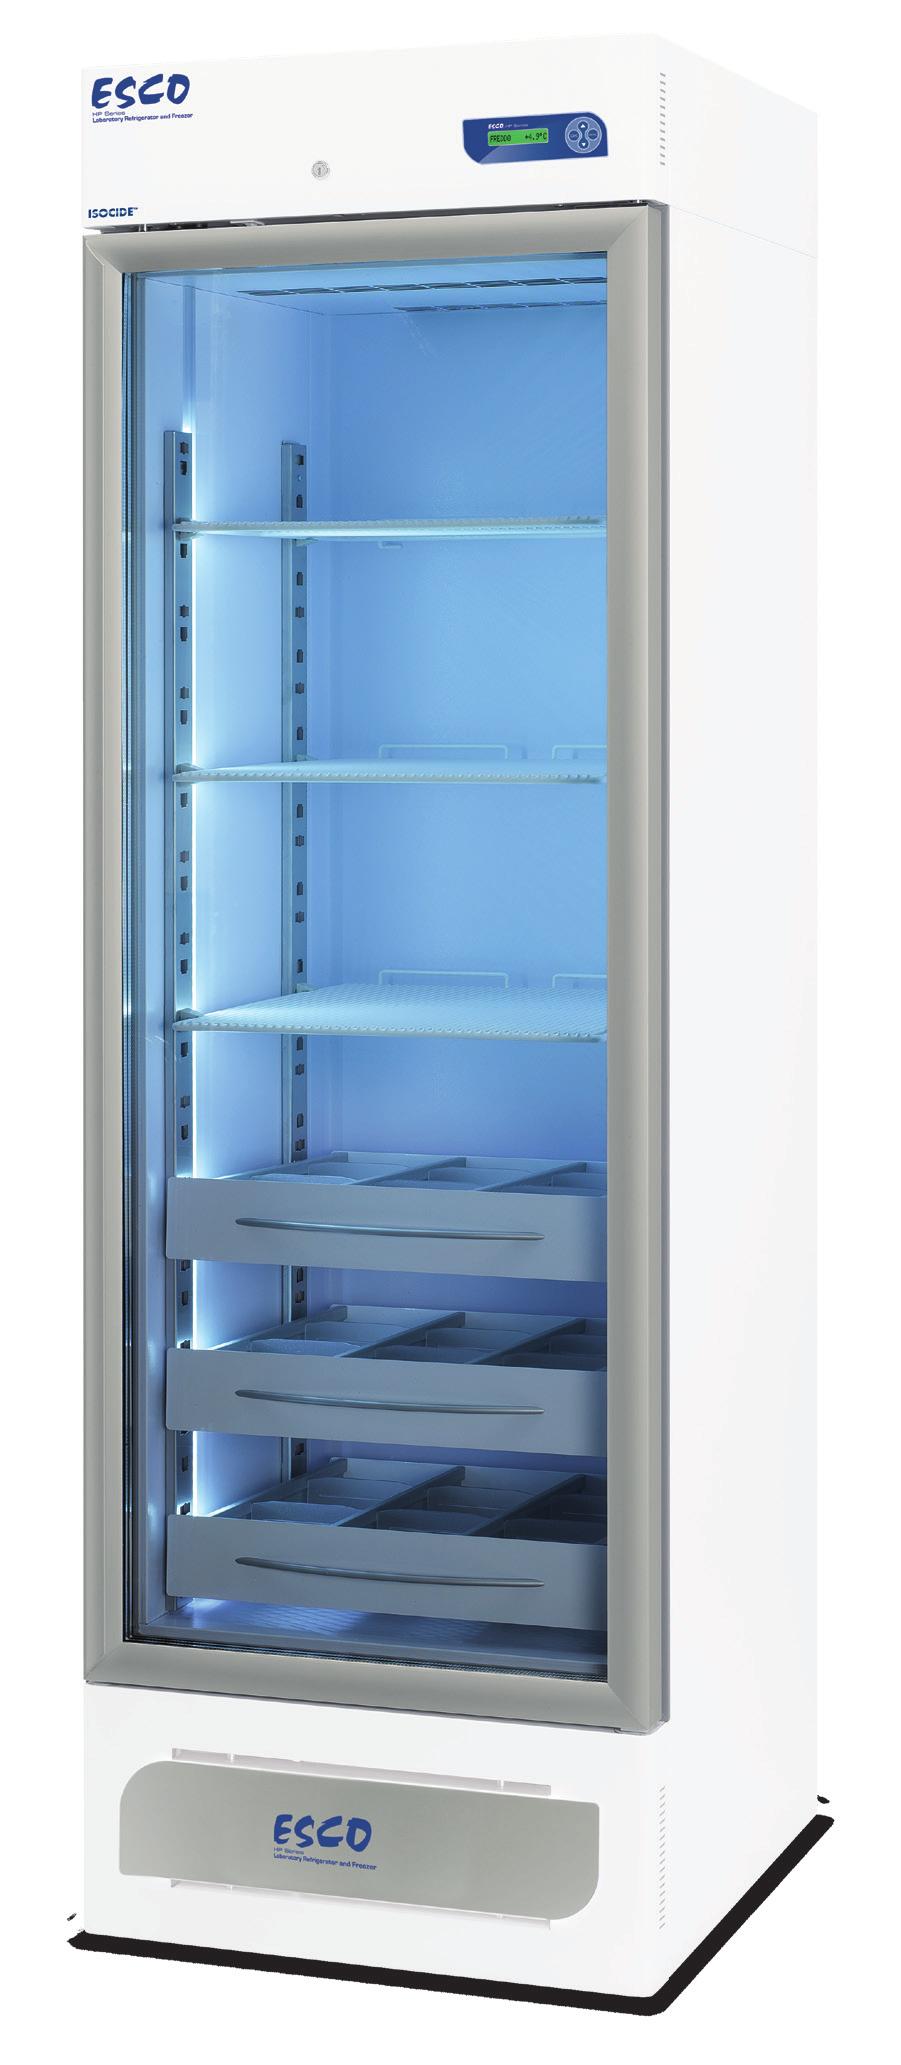 6 Laboratory Refrigerator Model: HR1-400S Door Lock Provides additional security for expensive samples and reagents from unauthorized users Displays data about the unit and used to control